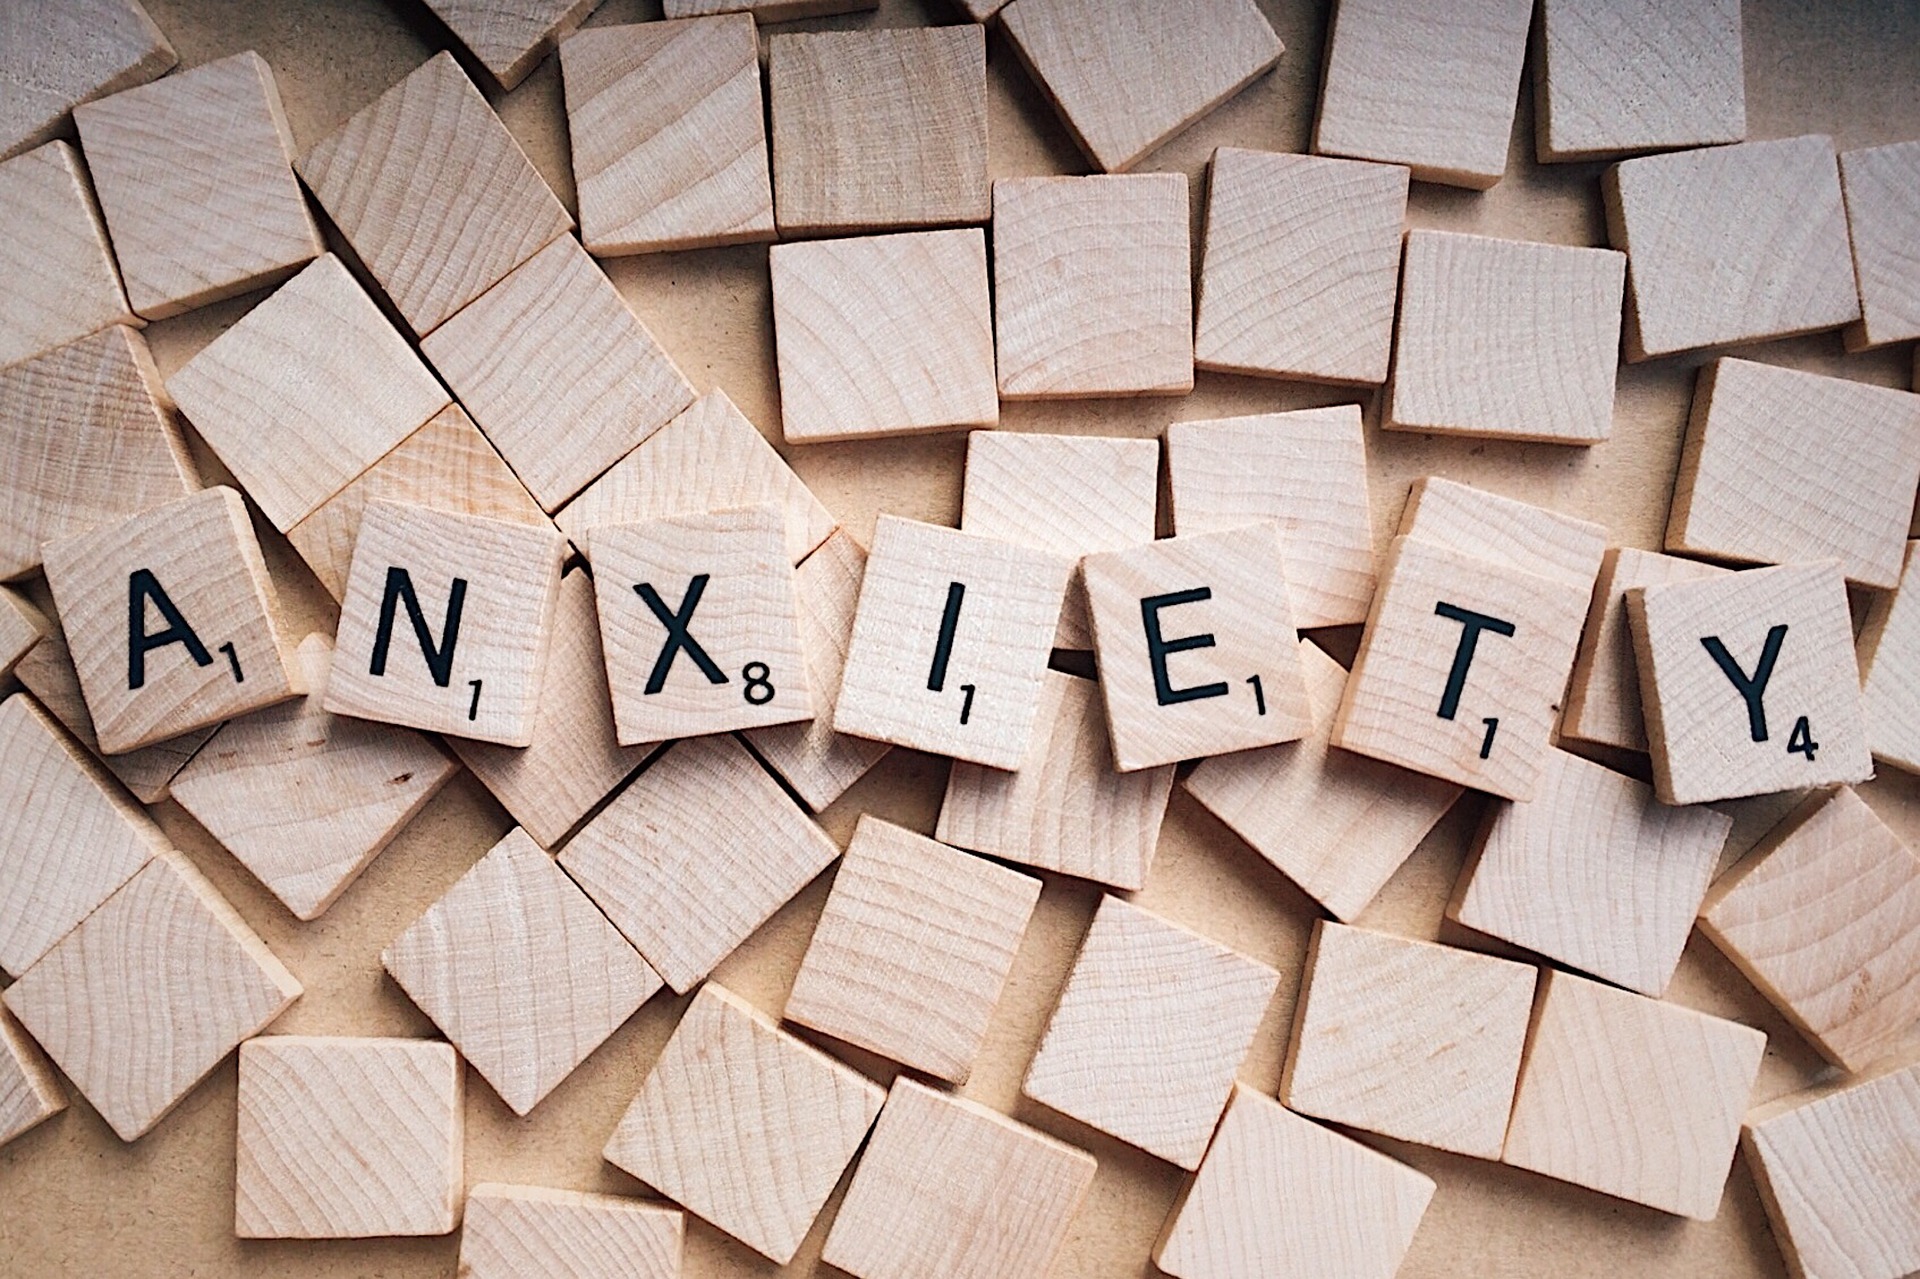 How to Deal With Anxiety From a Christian Perspective